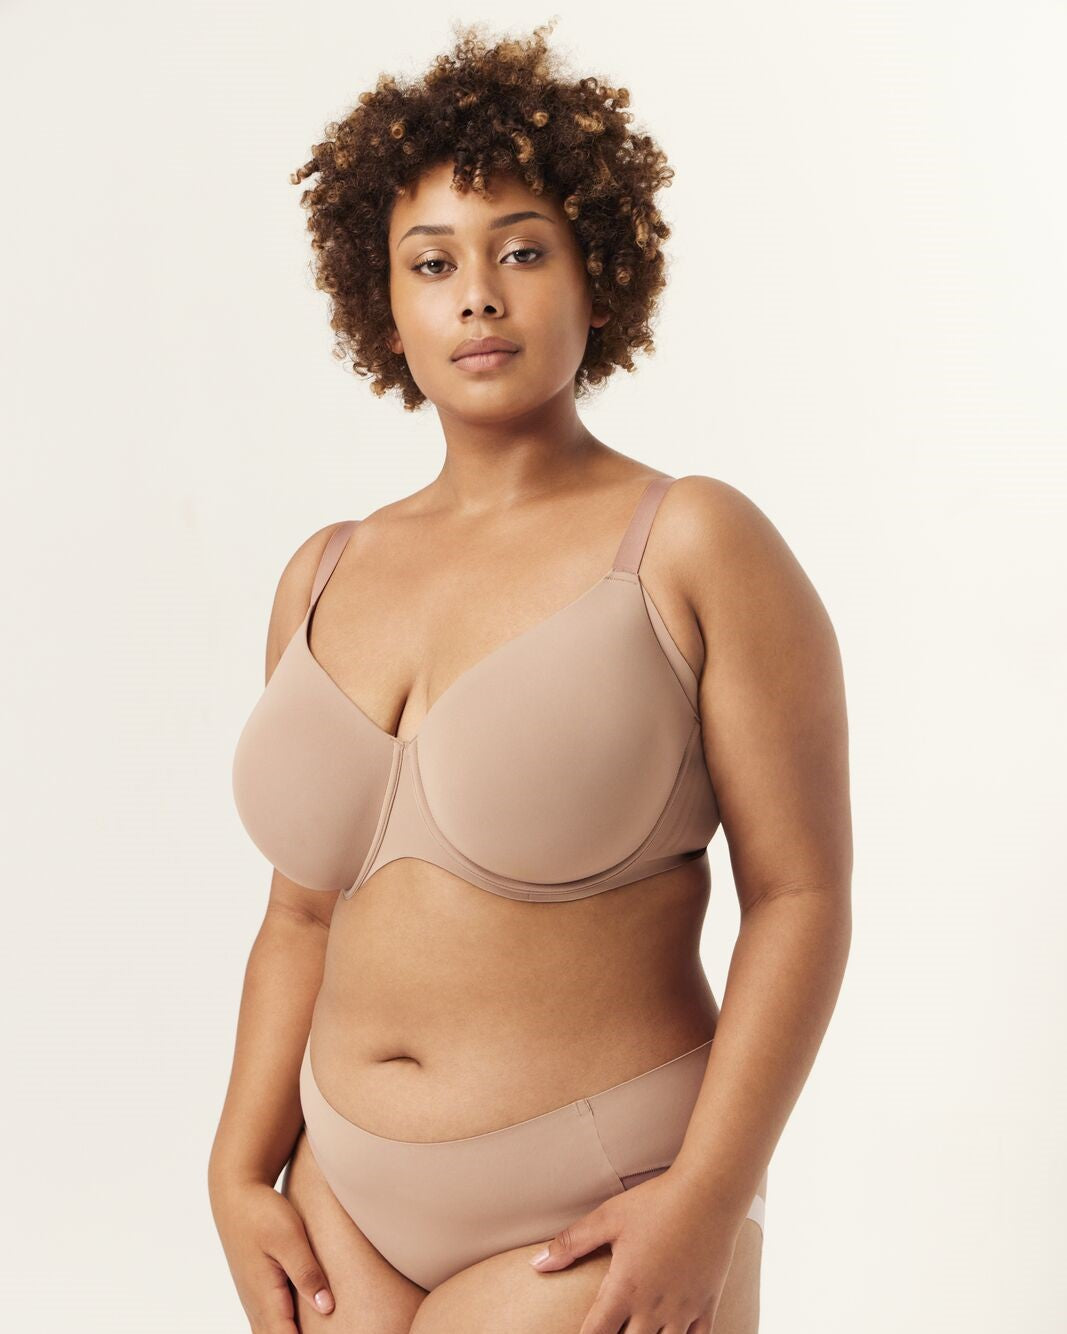 Buy Bra Size 32 34 36 38 40 AA-DDD Cup Sizes With Adjustable